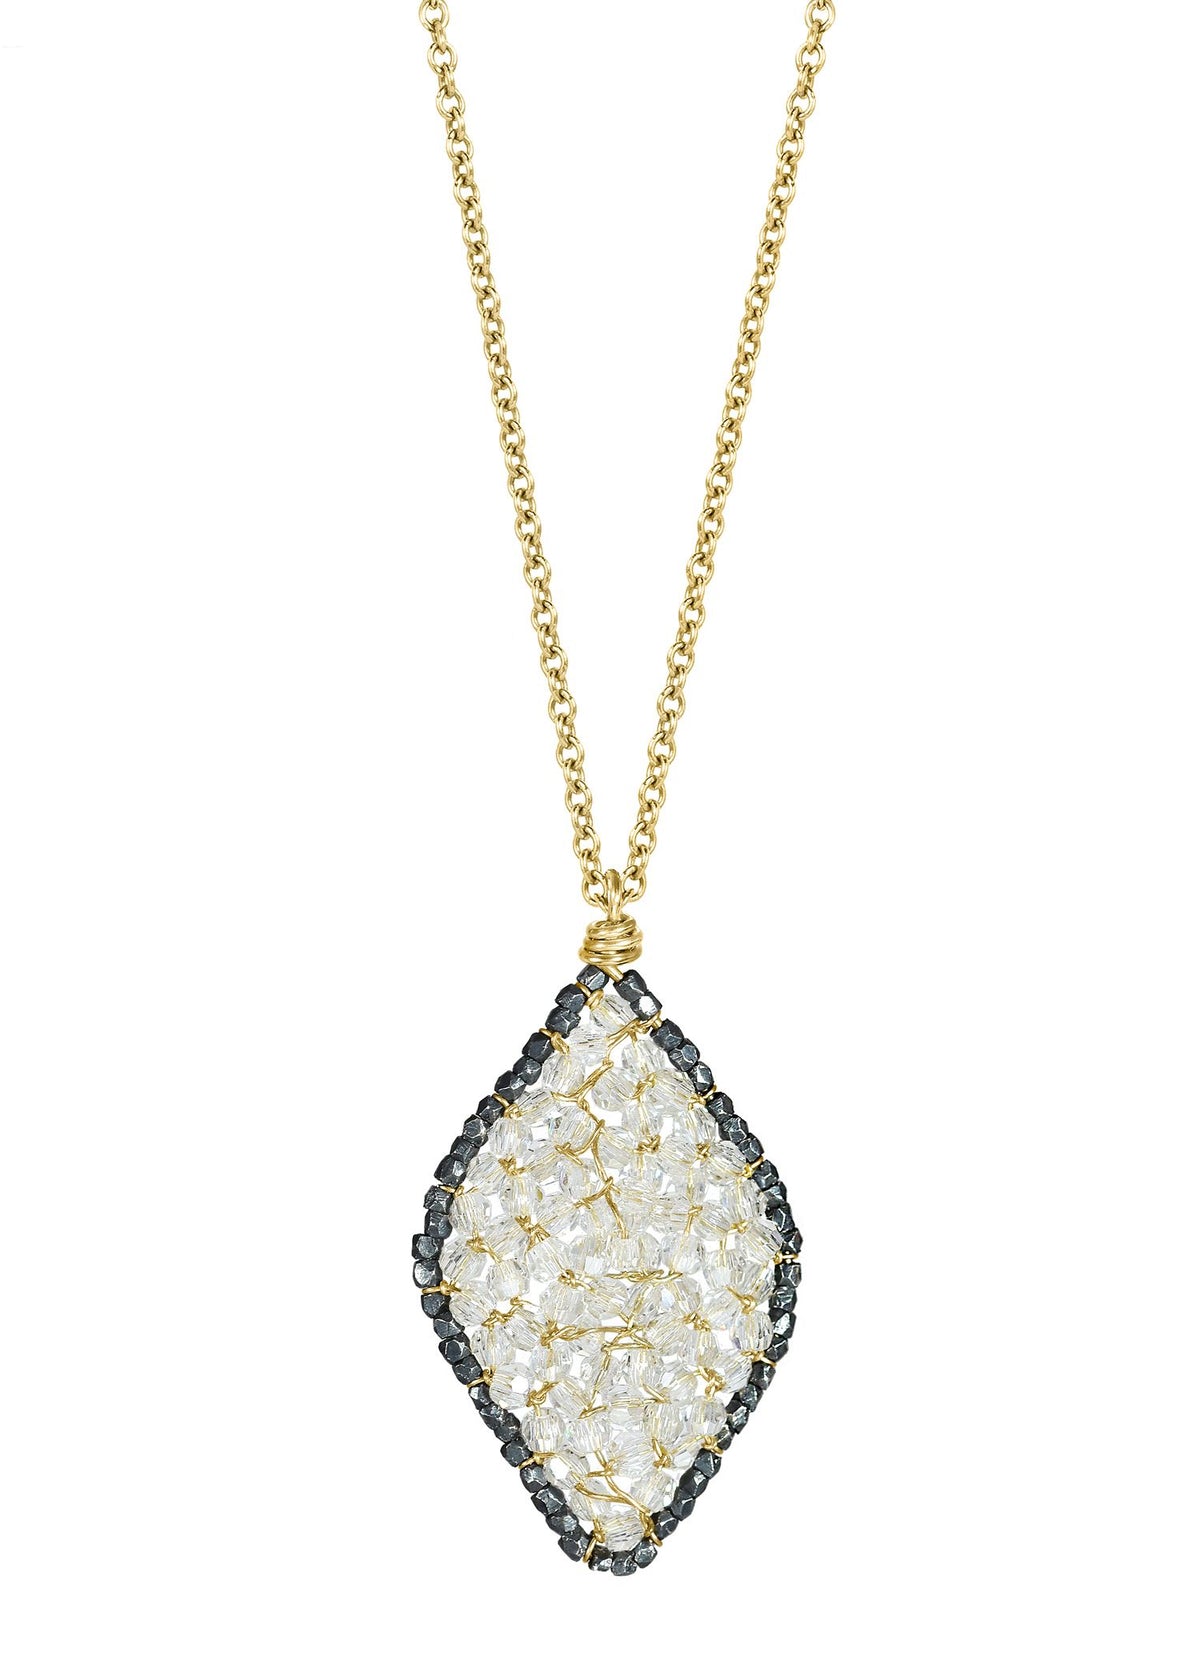 Crystal 14k gold fill Blackened sterling silver Mixed metal Chain measures 17” in length Pendant measures 1” in length and 5/8” in width Handmade in our Los Angeles studio